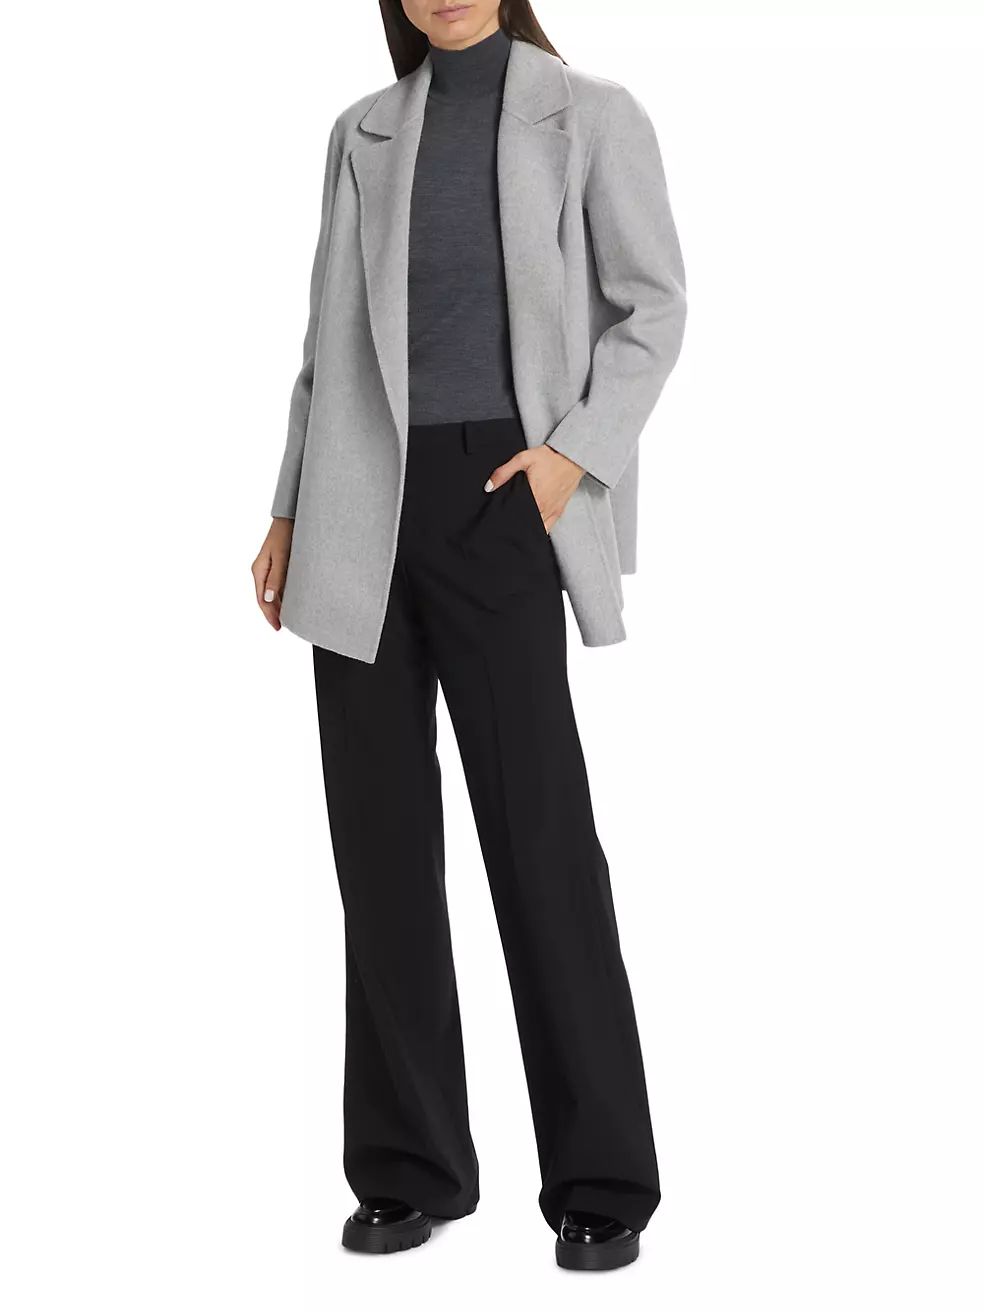 Clairene Wool-Cashmere Coat | Saks Fifth Avenue